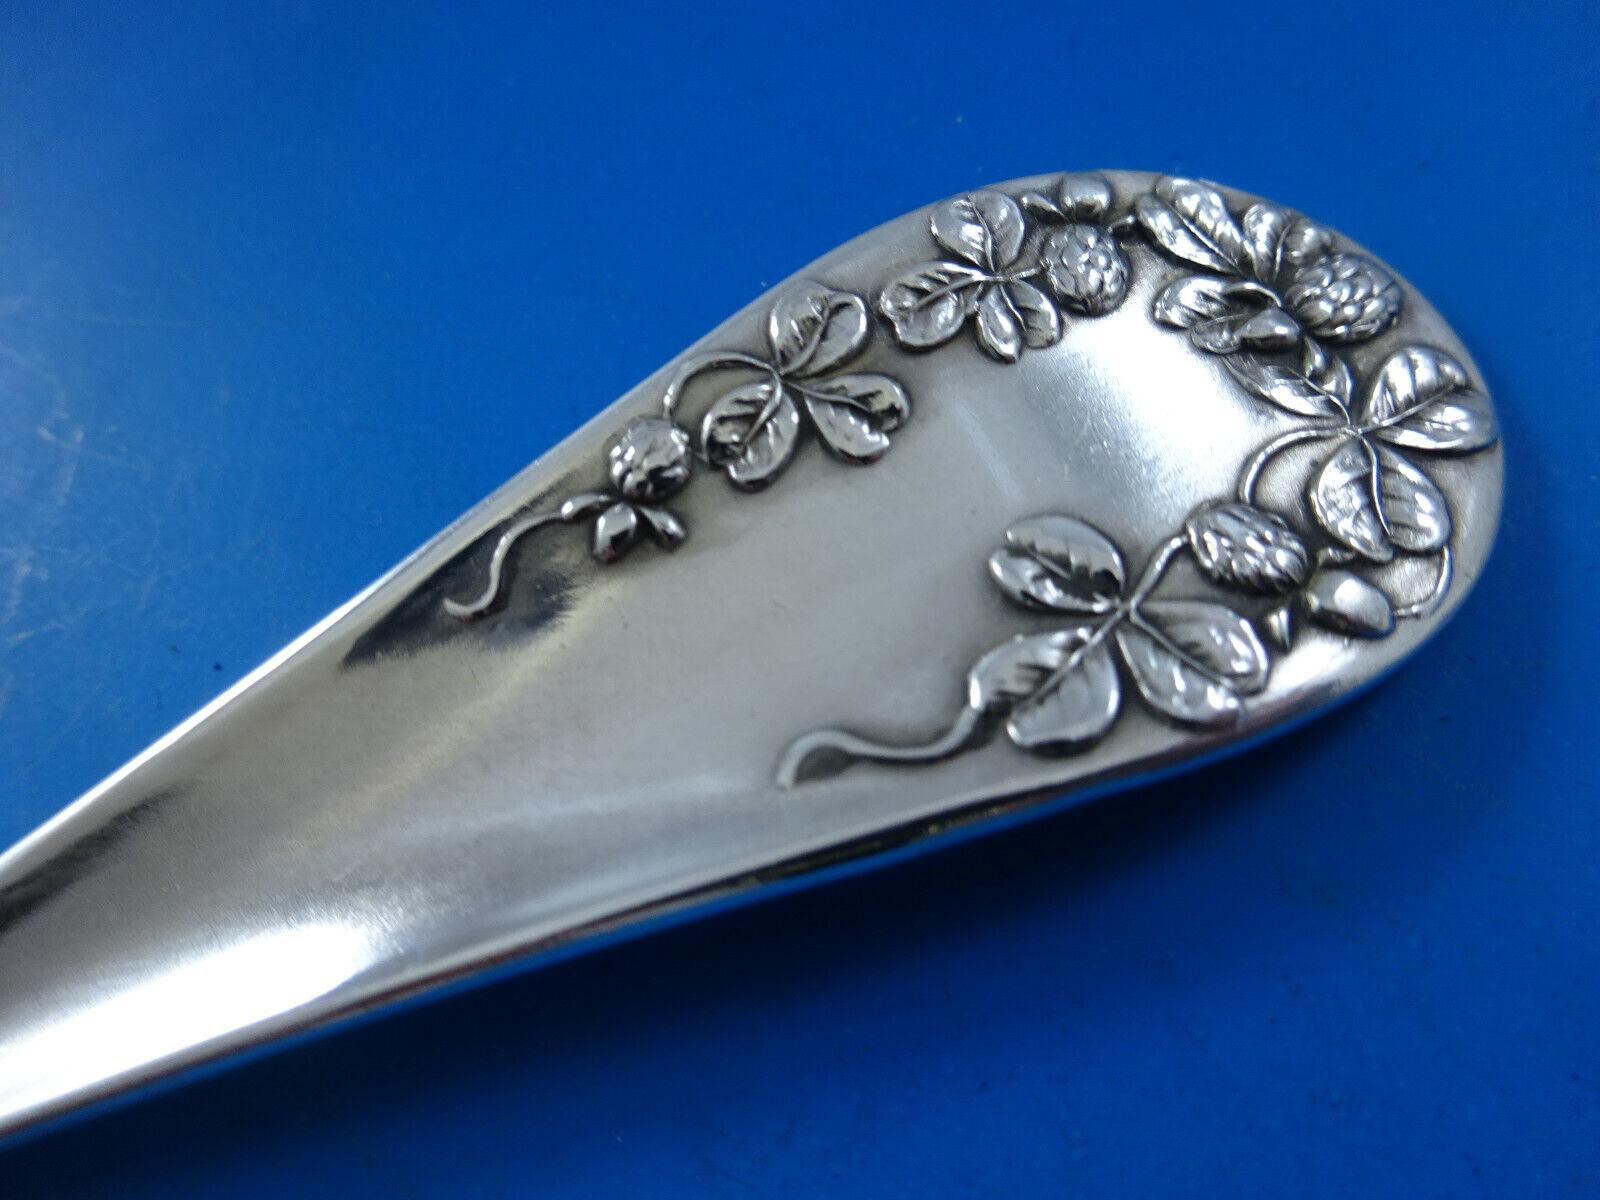 Rare dinner size Clover Blossom by Joseph Mayer, circa 1906, sterling silver Flatware set - 48 pieces. We love the detailing that is on the BACK and the front of the handle. This set includes:

8 Dinner Size Knives w/plated blades, 9 7/8